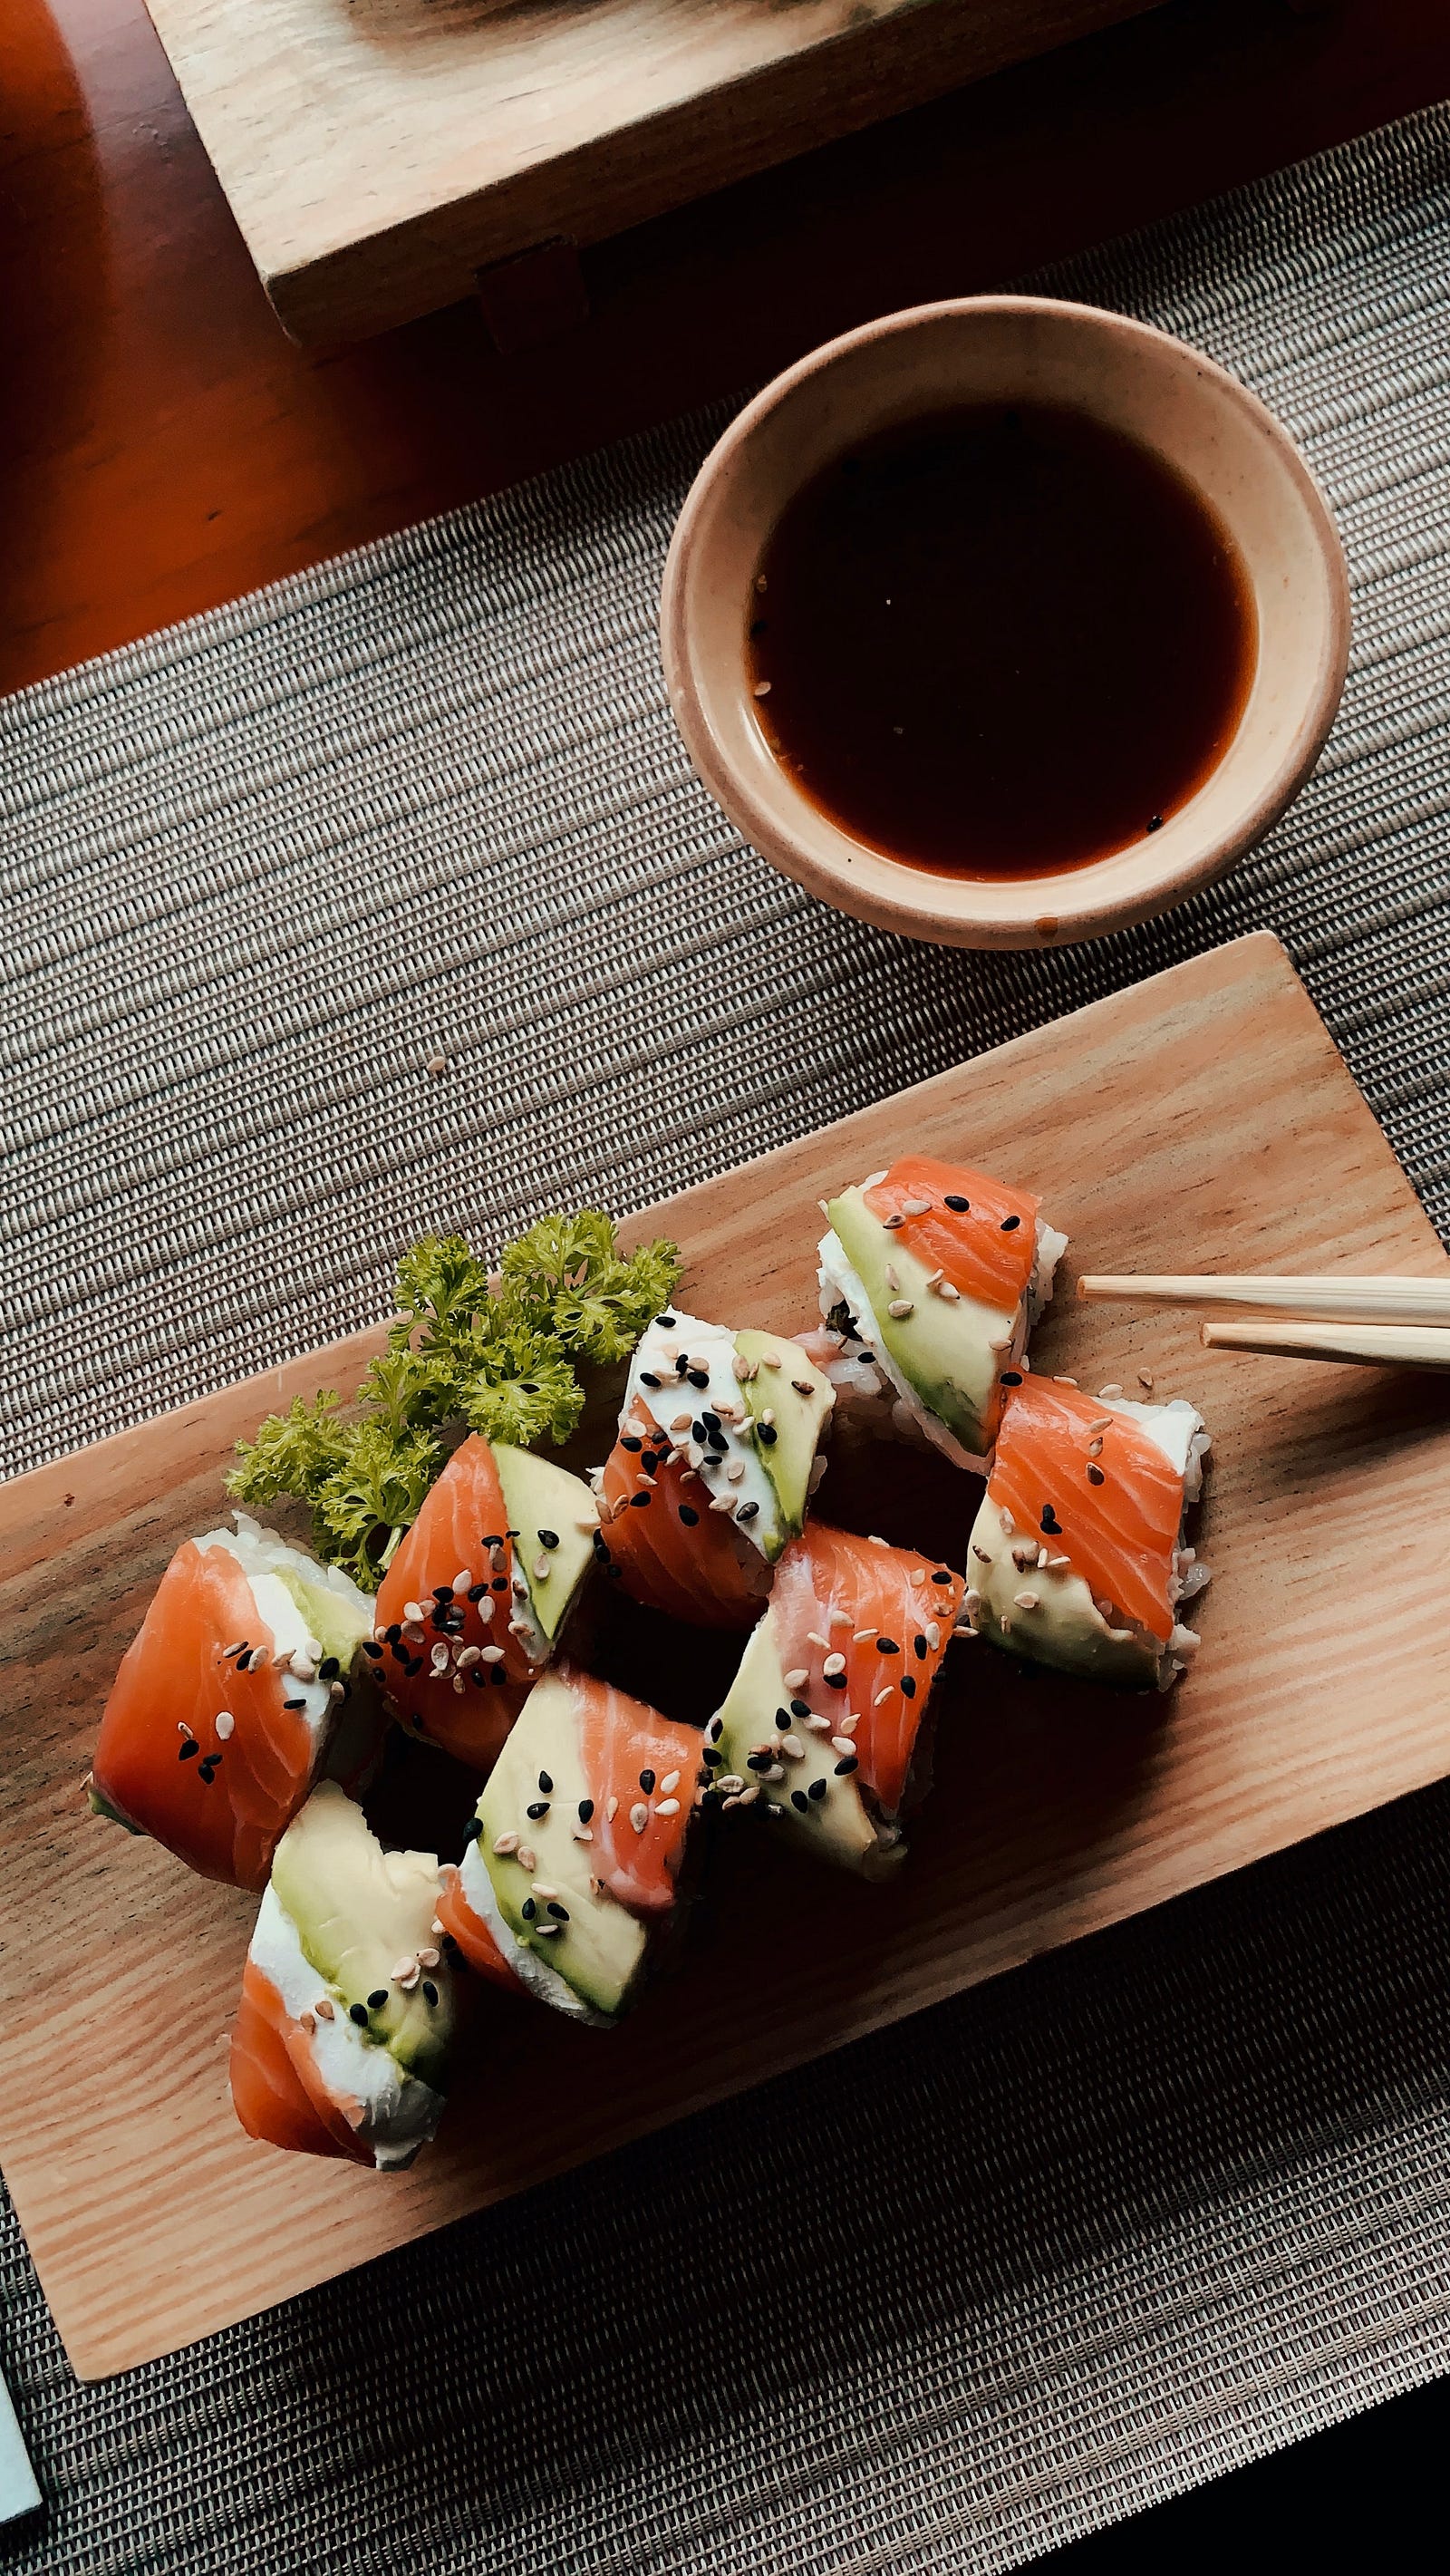 A flat wooden plate with eight pieces of sushi. So many view self-improvement as a destination. Reach your goal, and voila! You are done. But what if you could aim to get one percent better daily? Small, incremental improvements — kaizen — over months, years, and decades can lead to extraordinary outcomes.